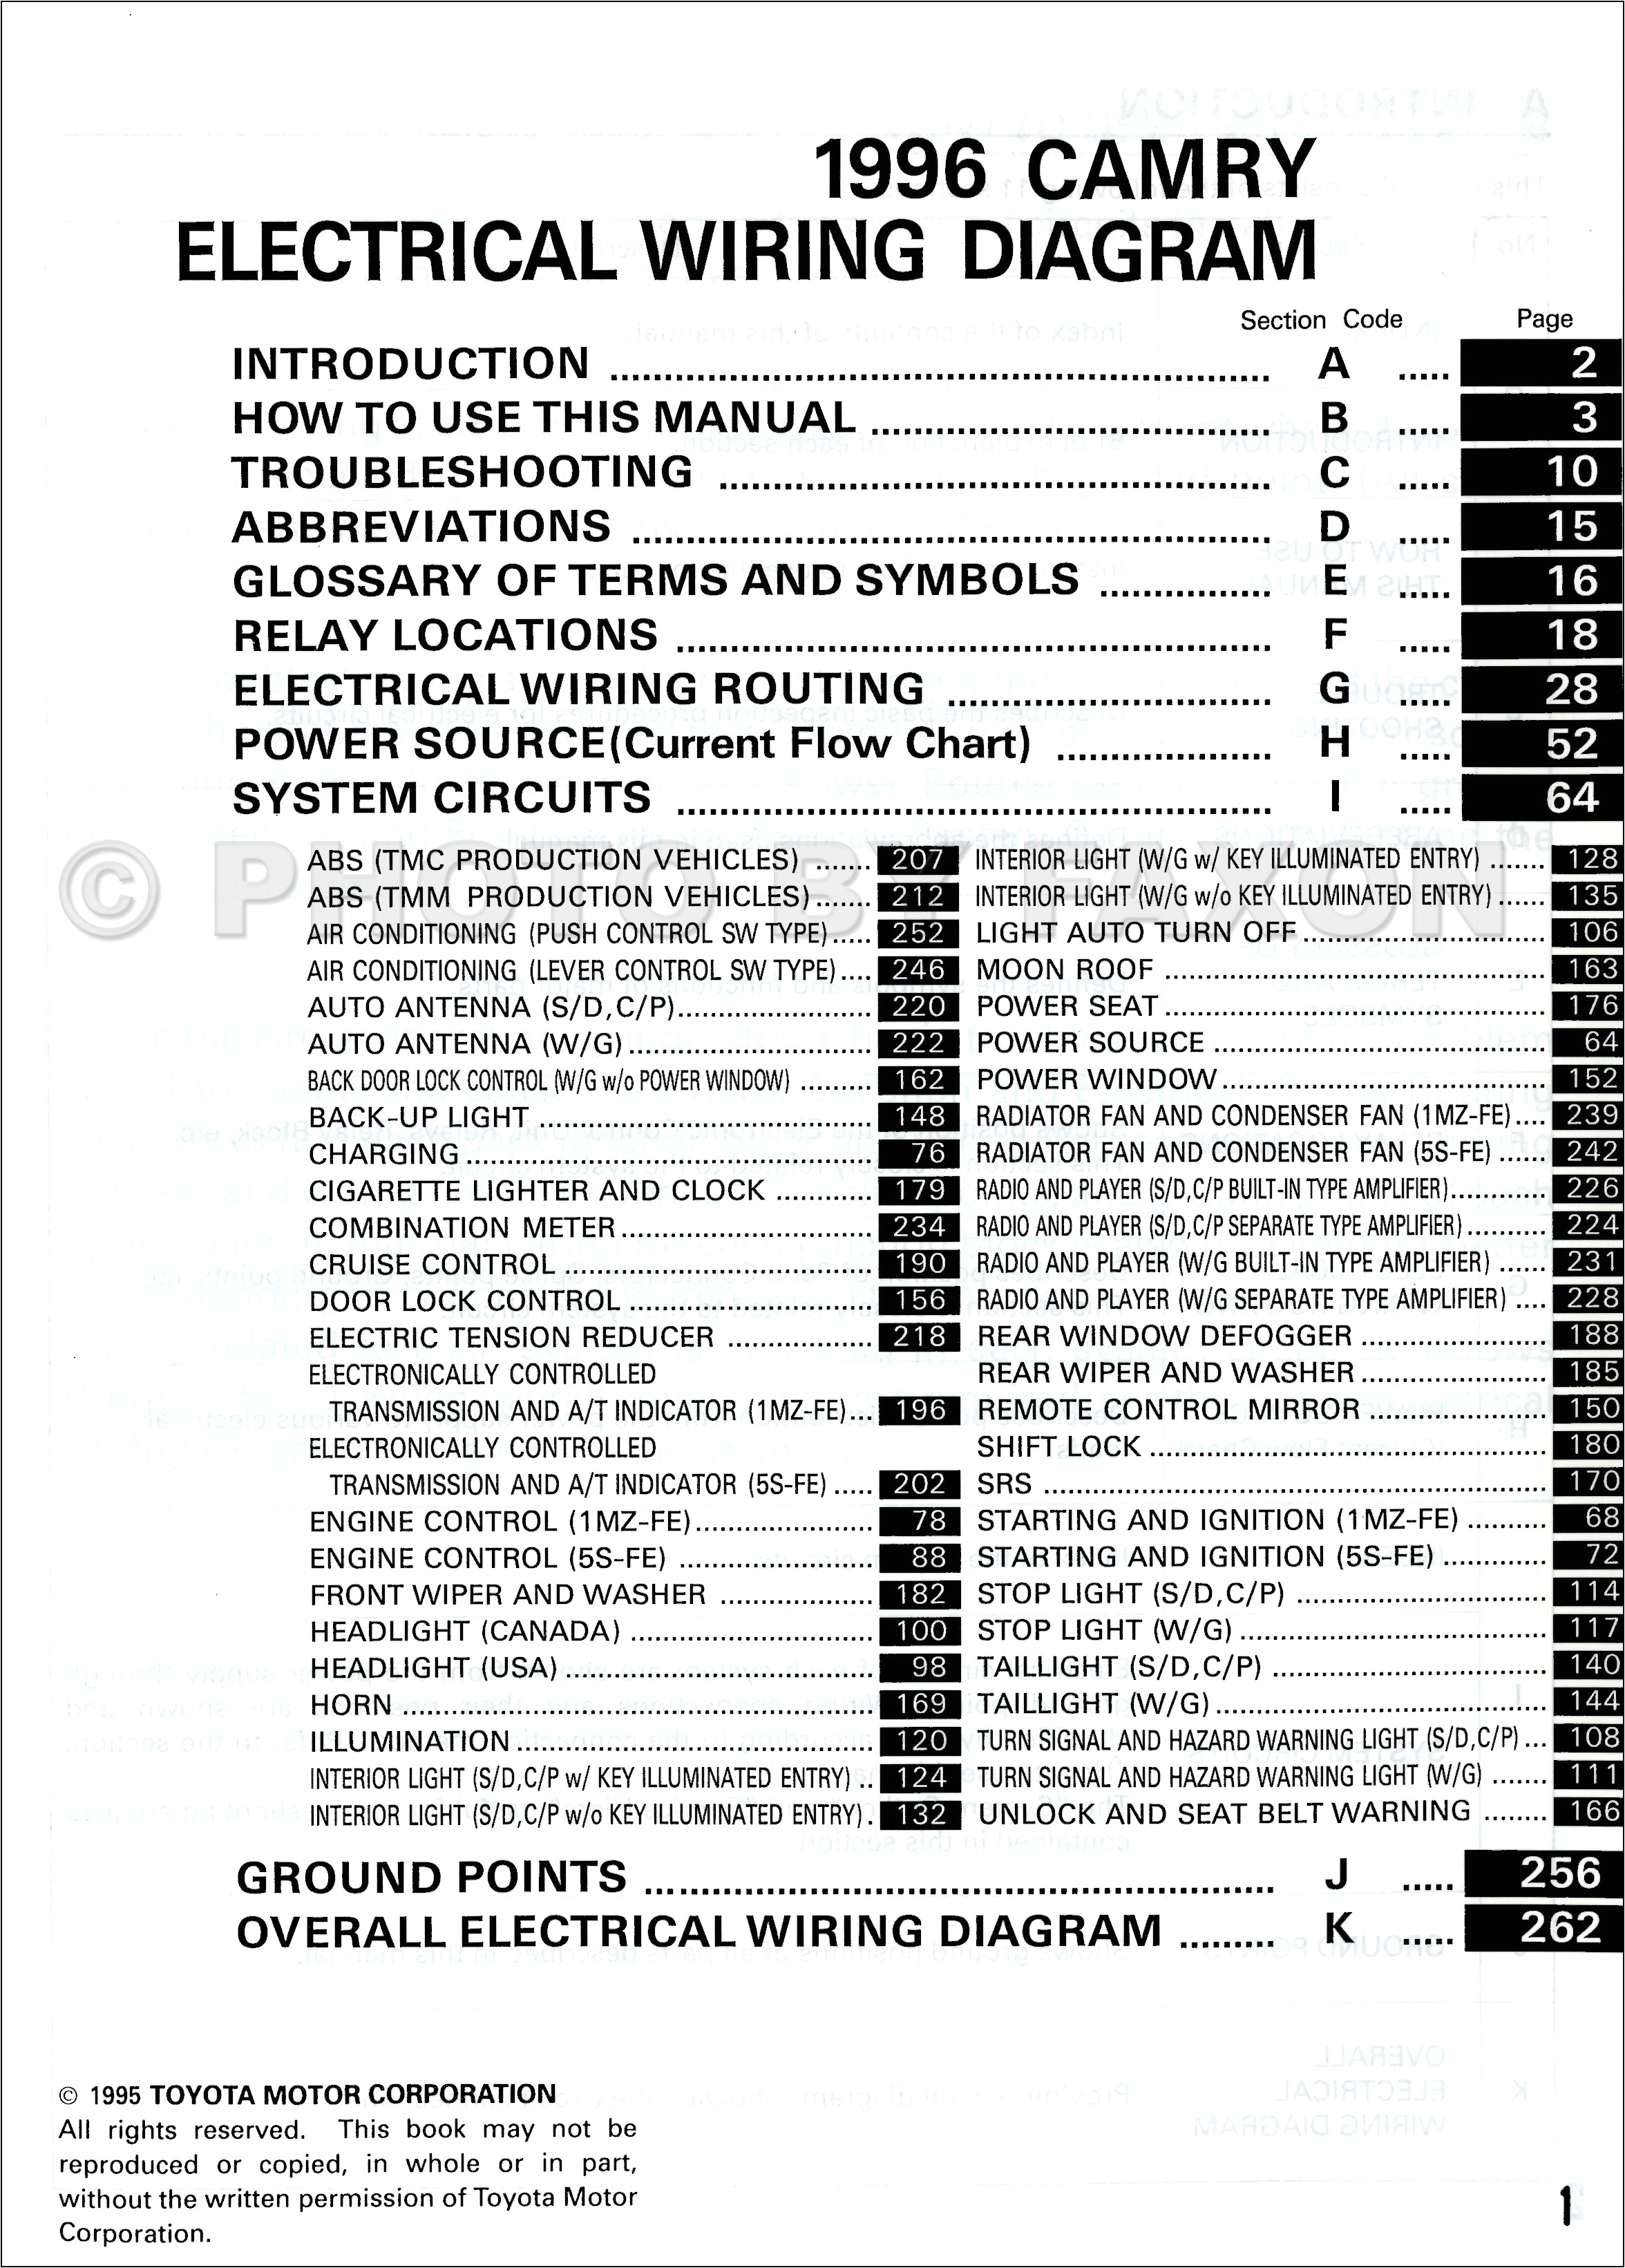 92 toyota camry electrical wiring diagram wiring diagram centre camry wiring diagram 2010 90 camry fuse